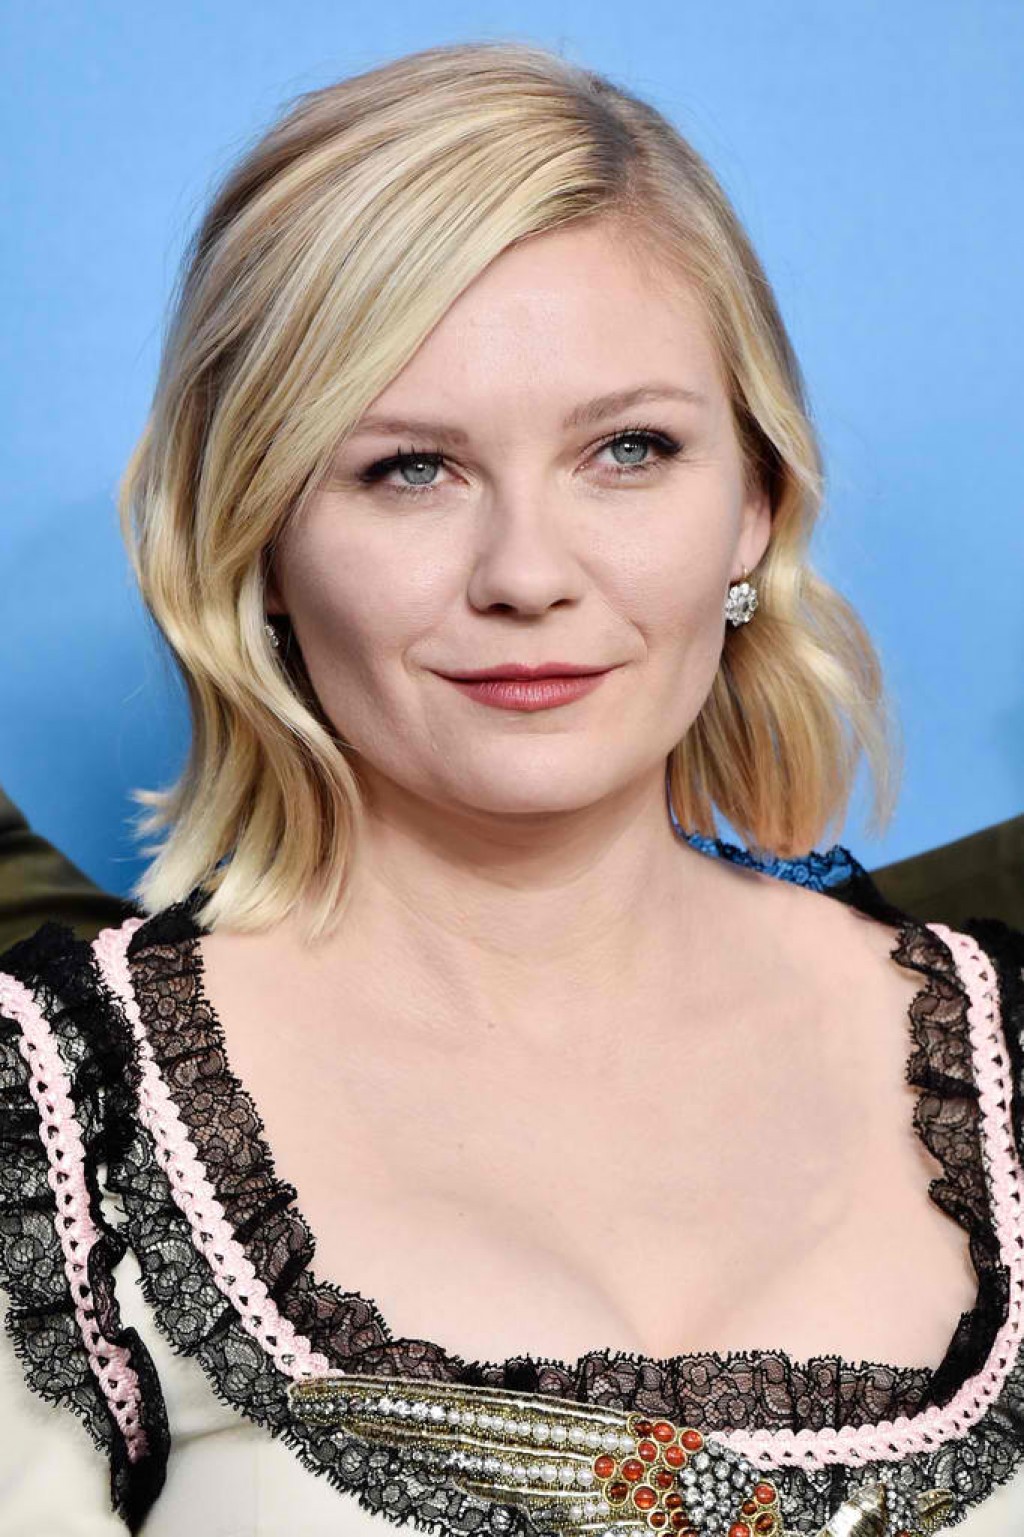 Kirsten Dunst in Gucci at the Berlinale “Midnight Special” Photo Call ...